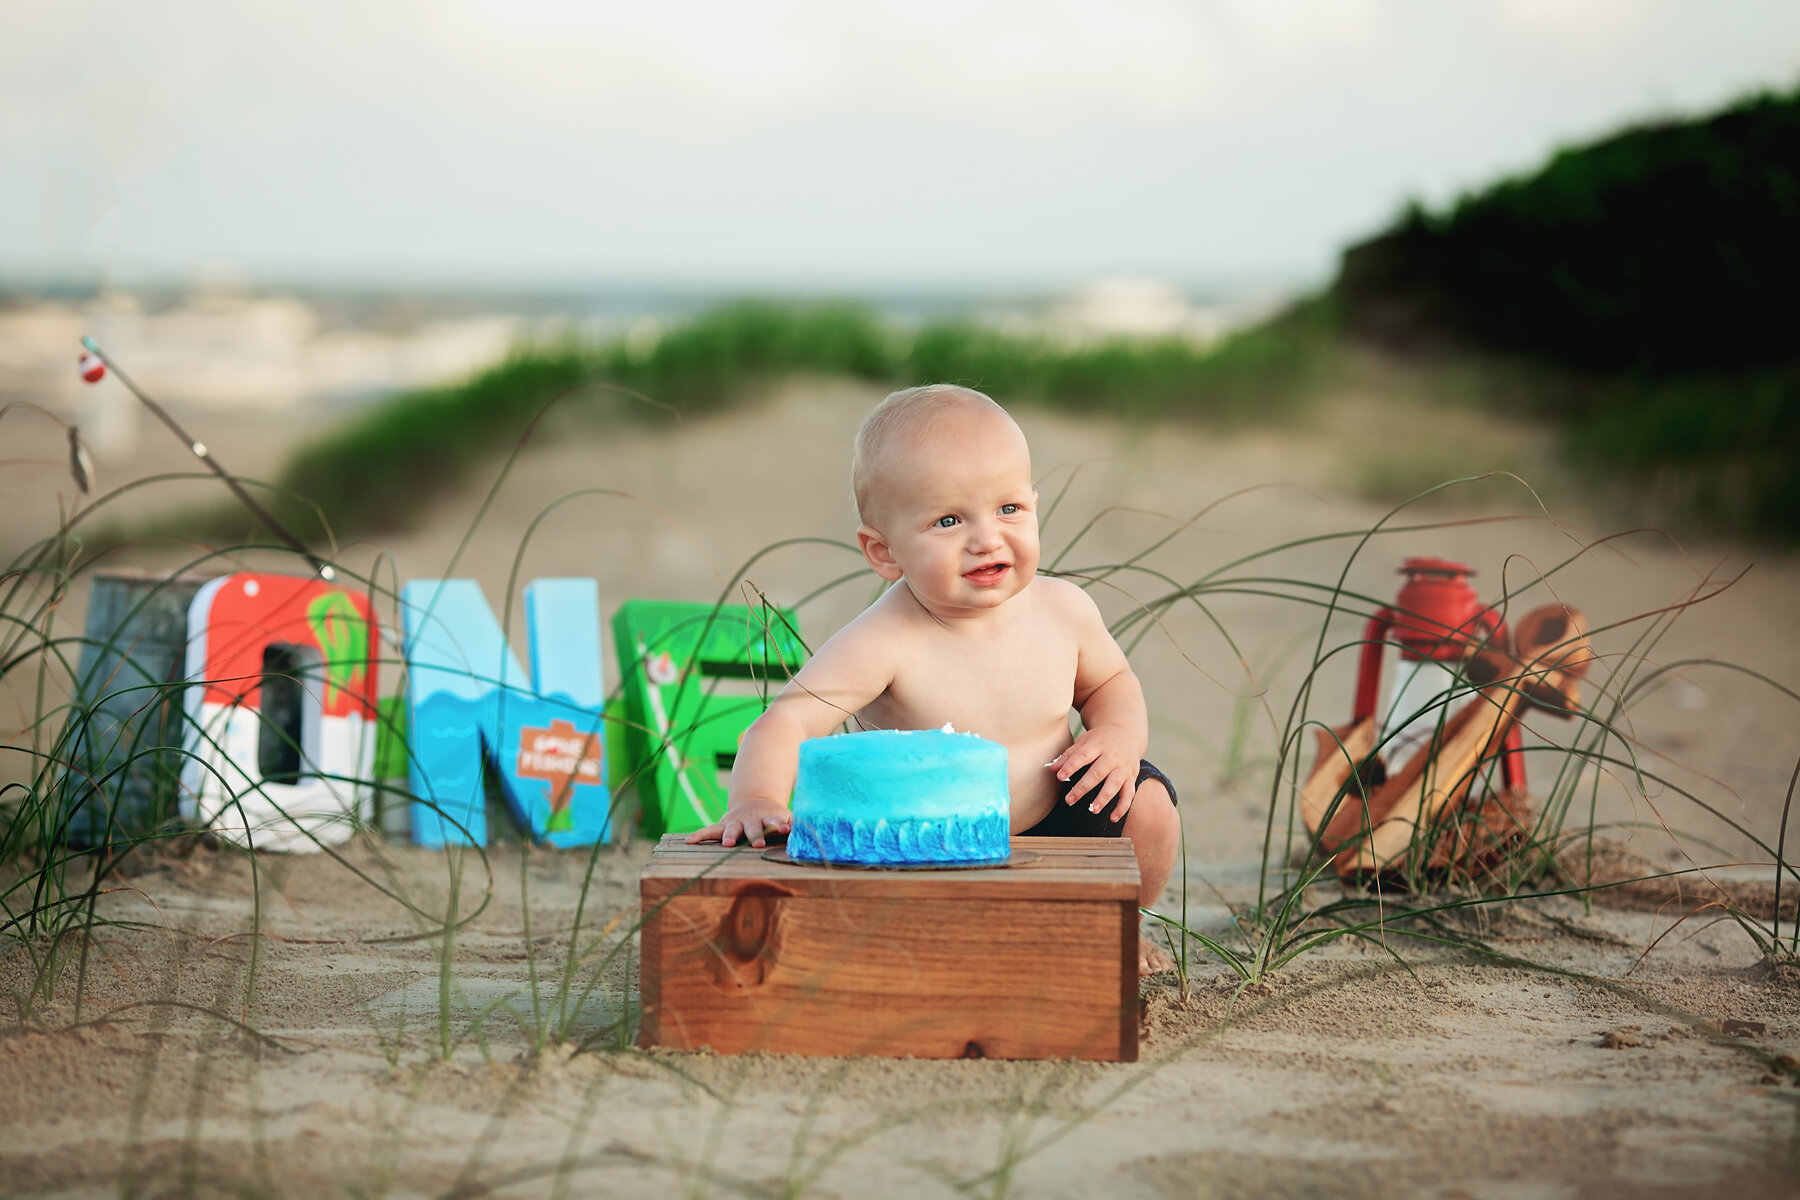 Fishing themed cake smash for this little beach baby!